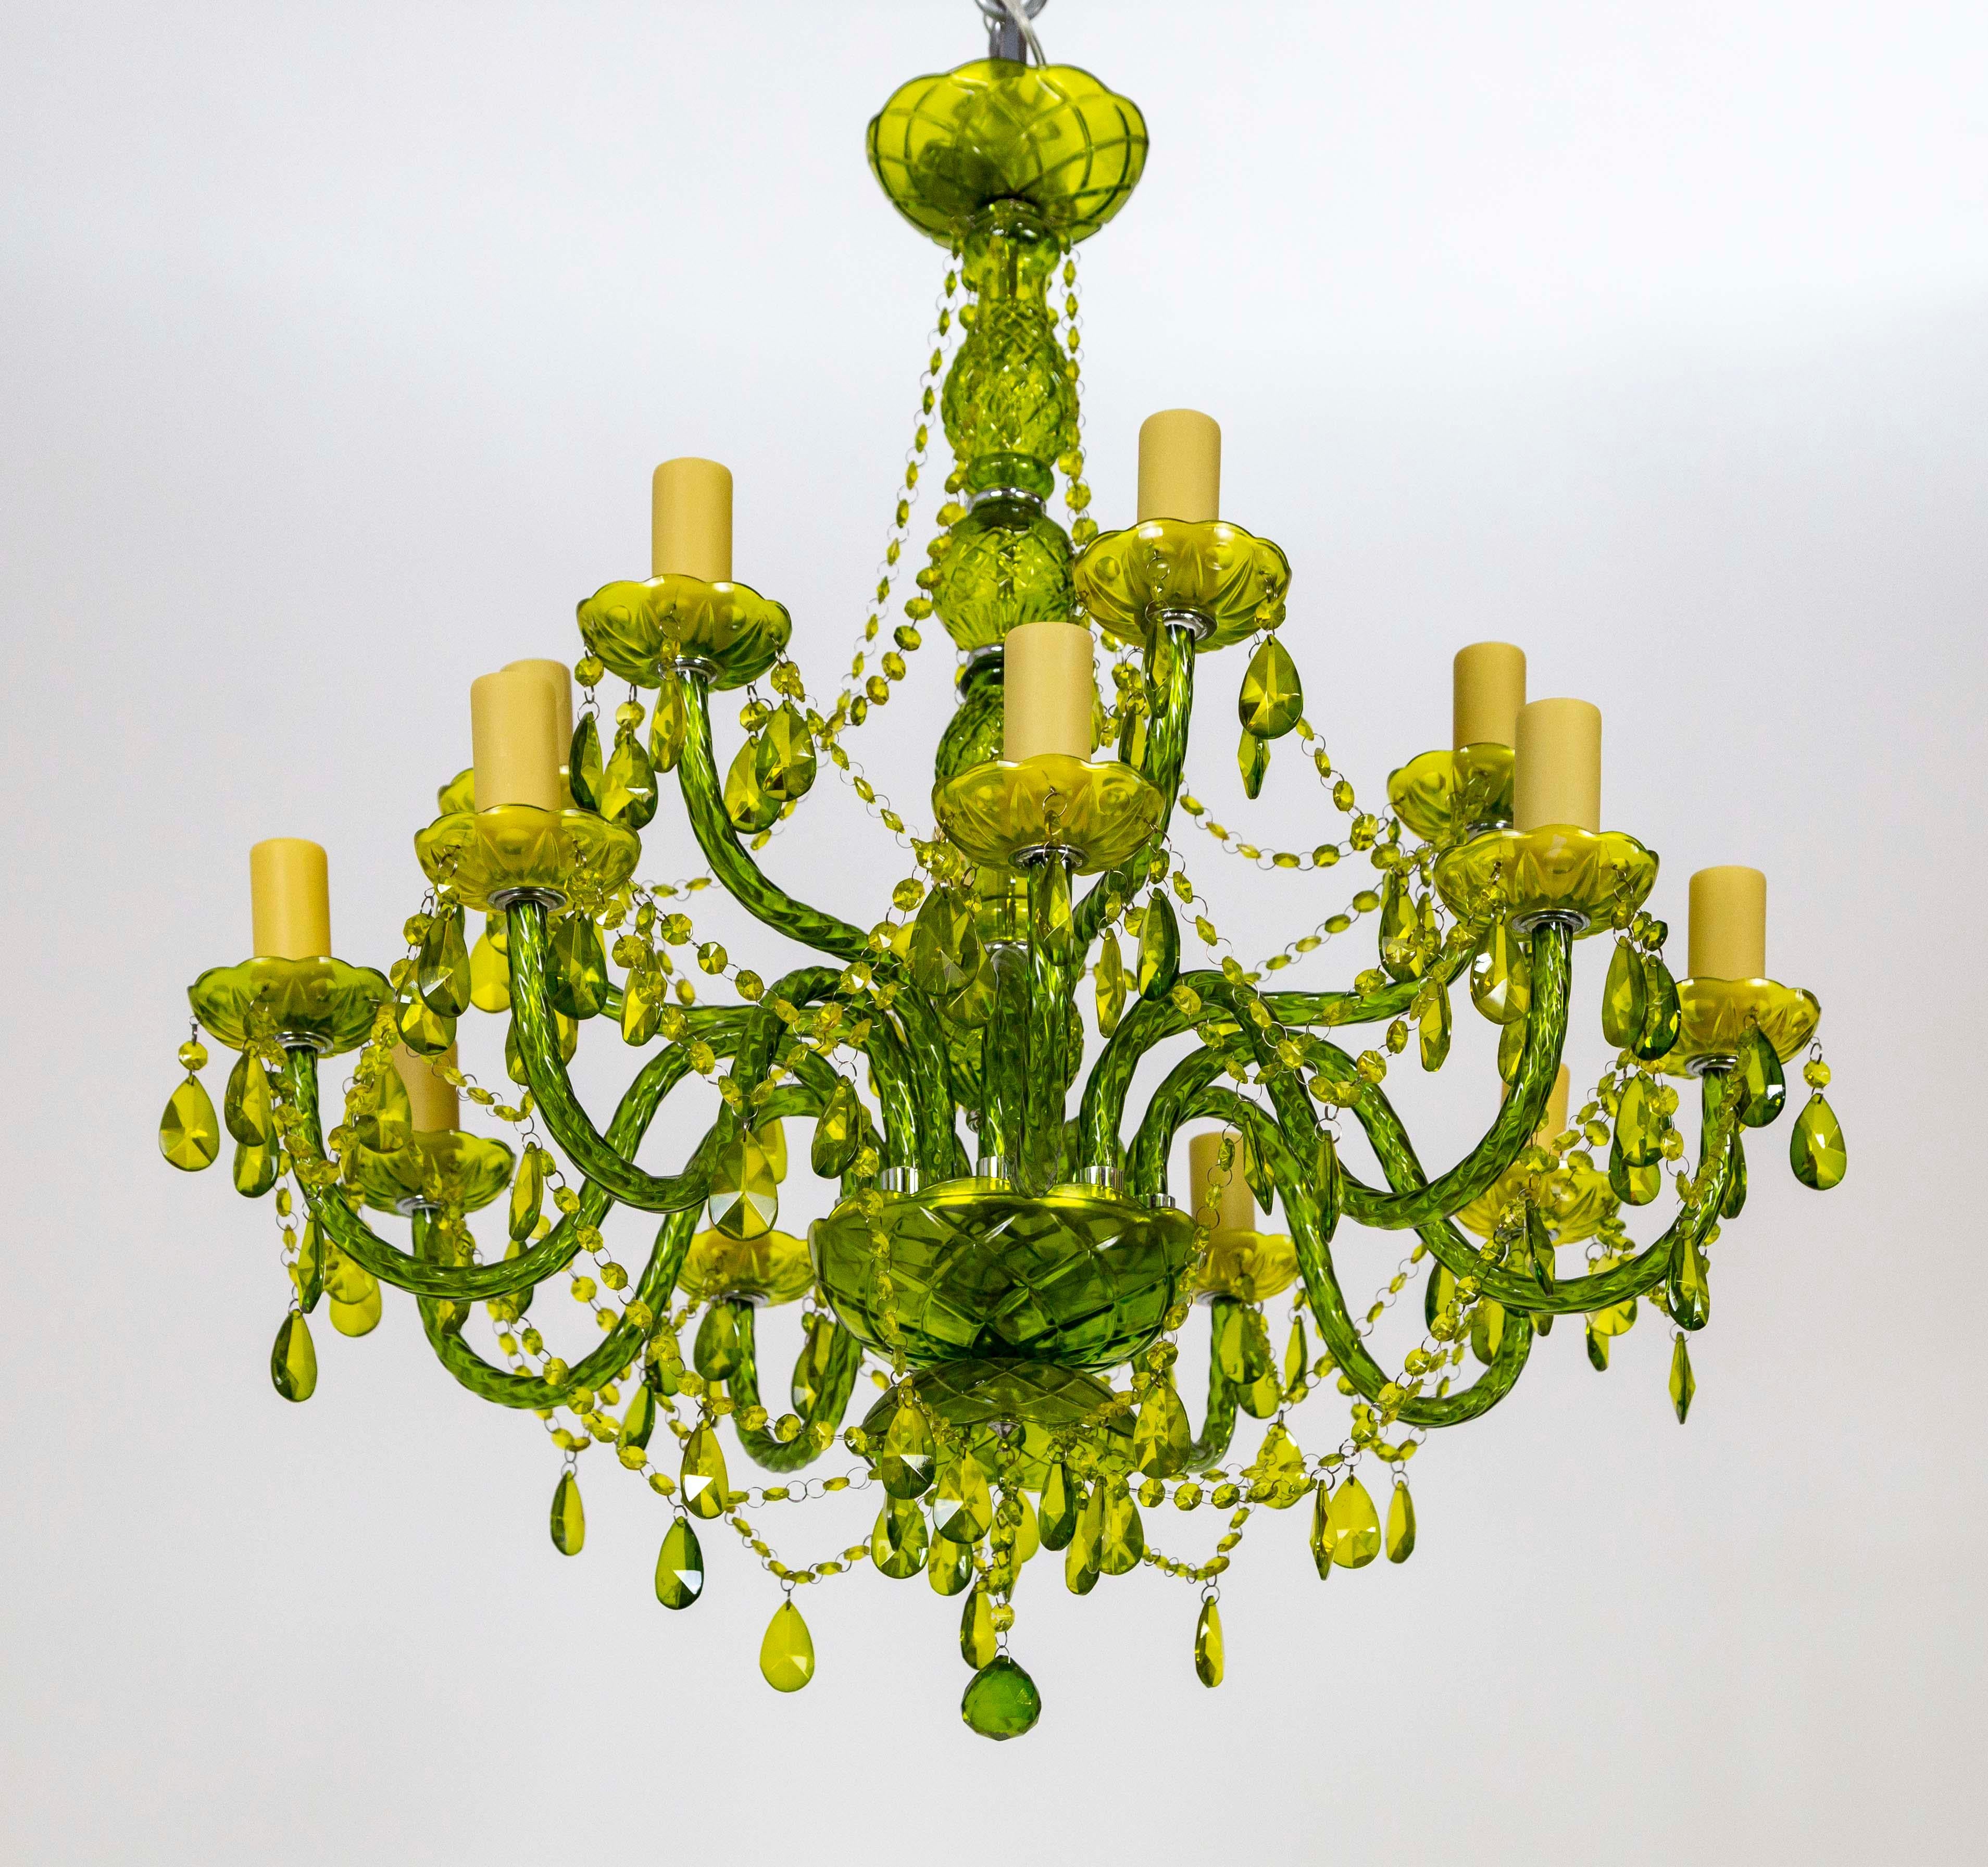 A green, candlestick-style chandelier with two tiers of curving arms, honeycomb-colored candle covers, and crystal garlands. The body is comprised of green-tinted glass with glass and acrylic crystals. 36” height x 30” width/depth. 

We offer UL